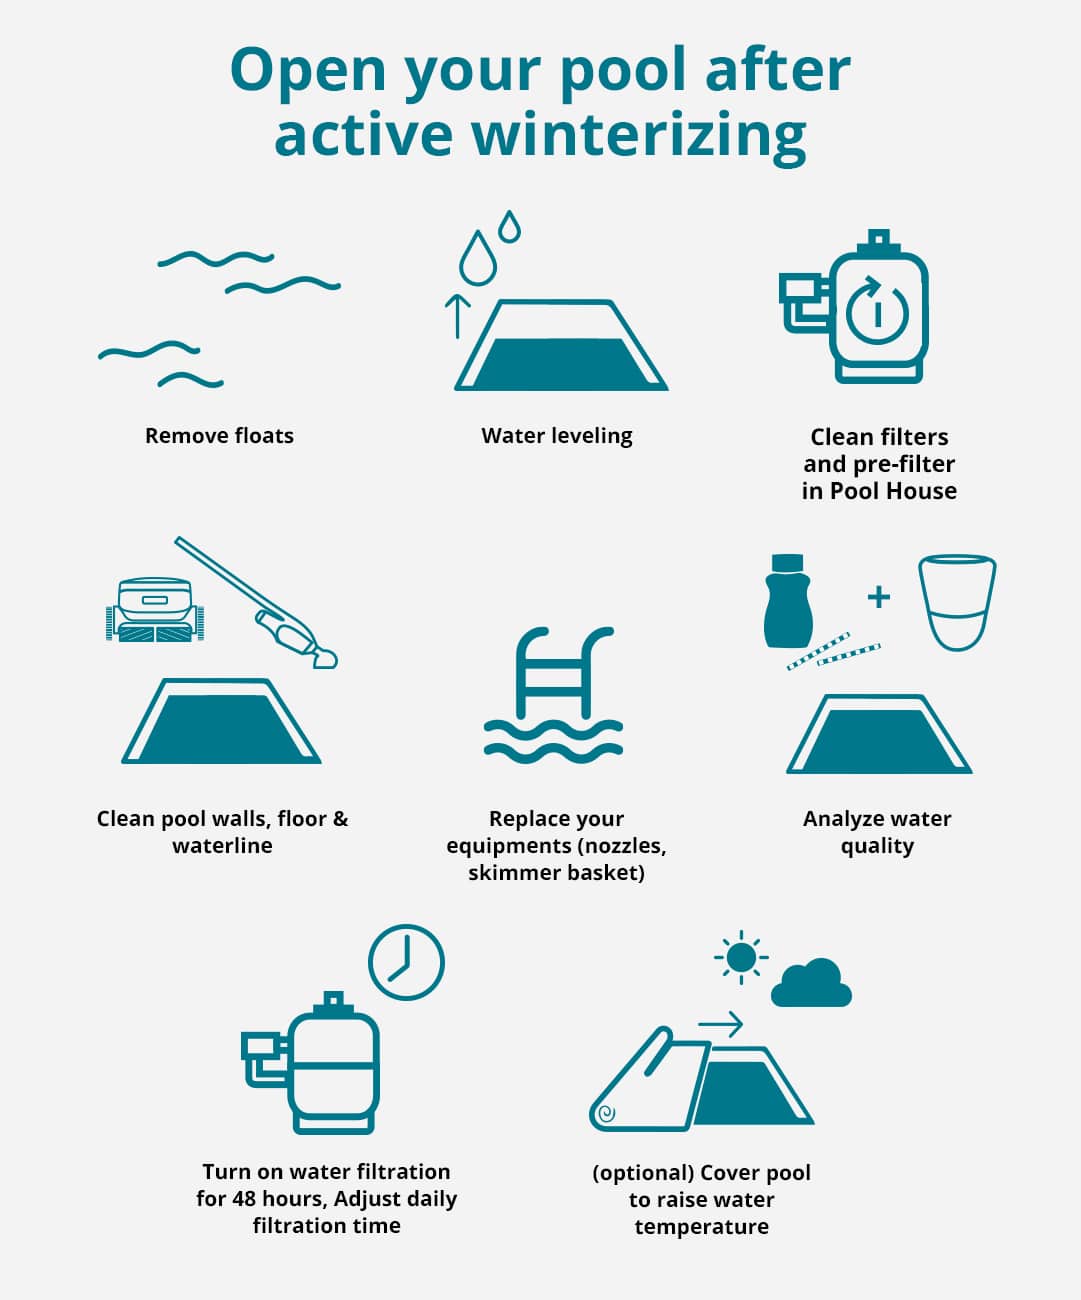 Steps to open a pool after active wintering 